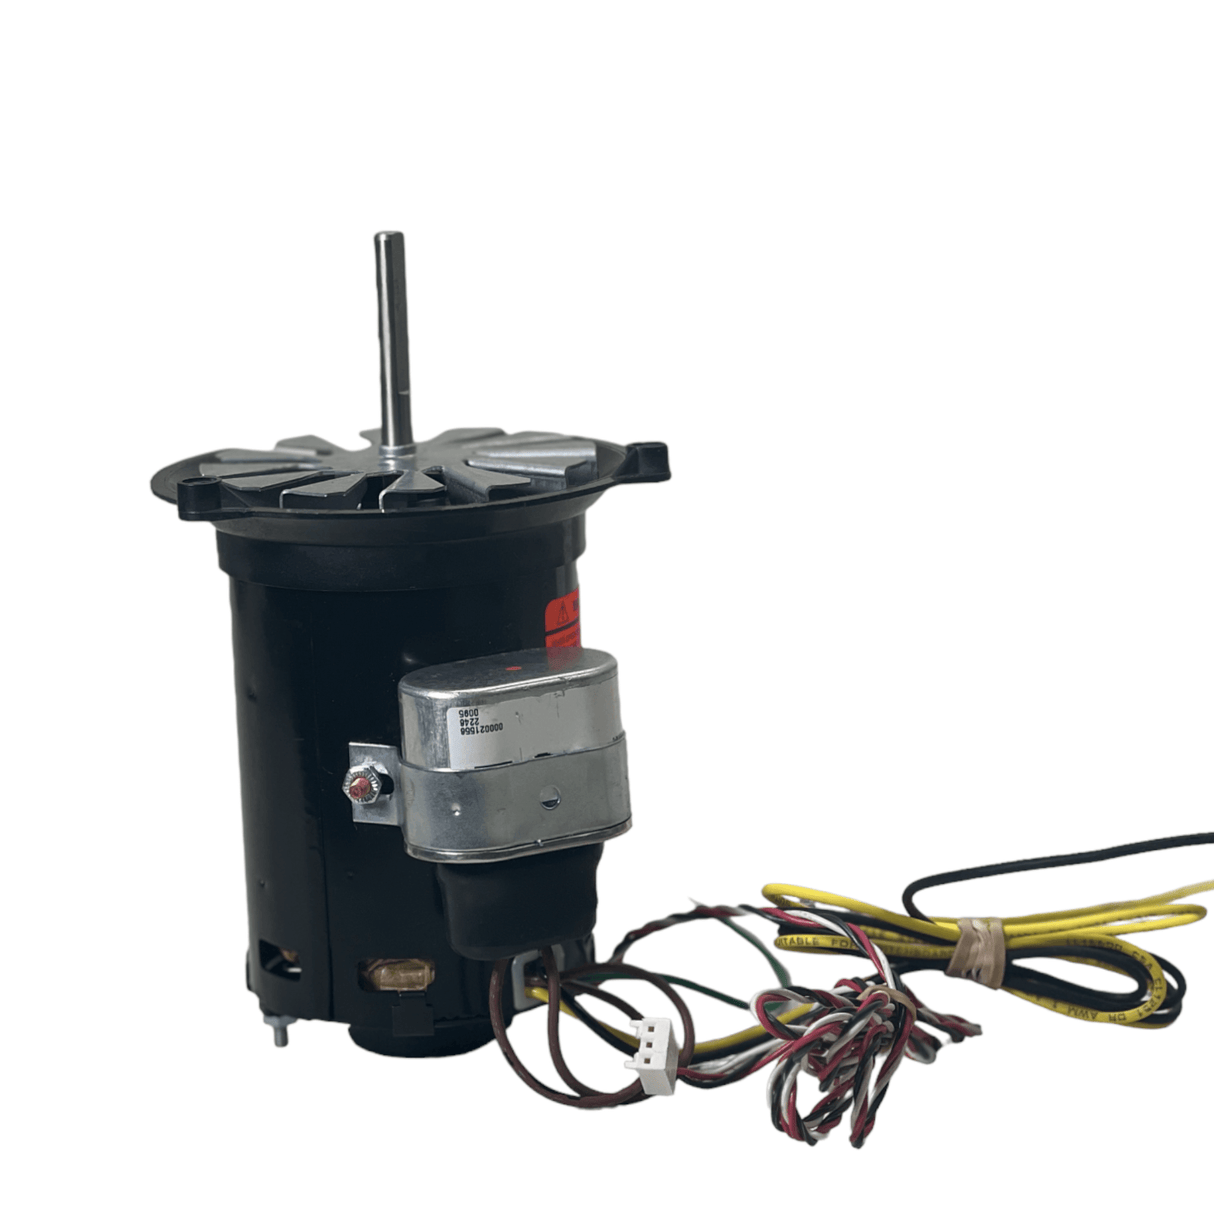 HC30CL461 Carrier Inducer Motor with Mounting Bracket.